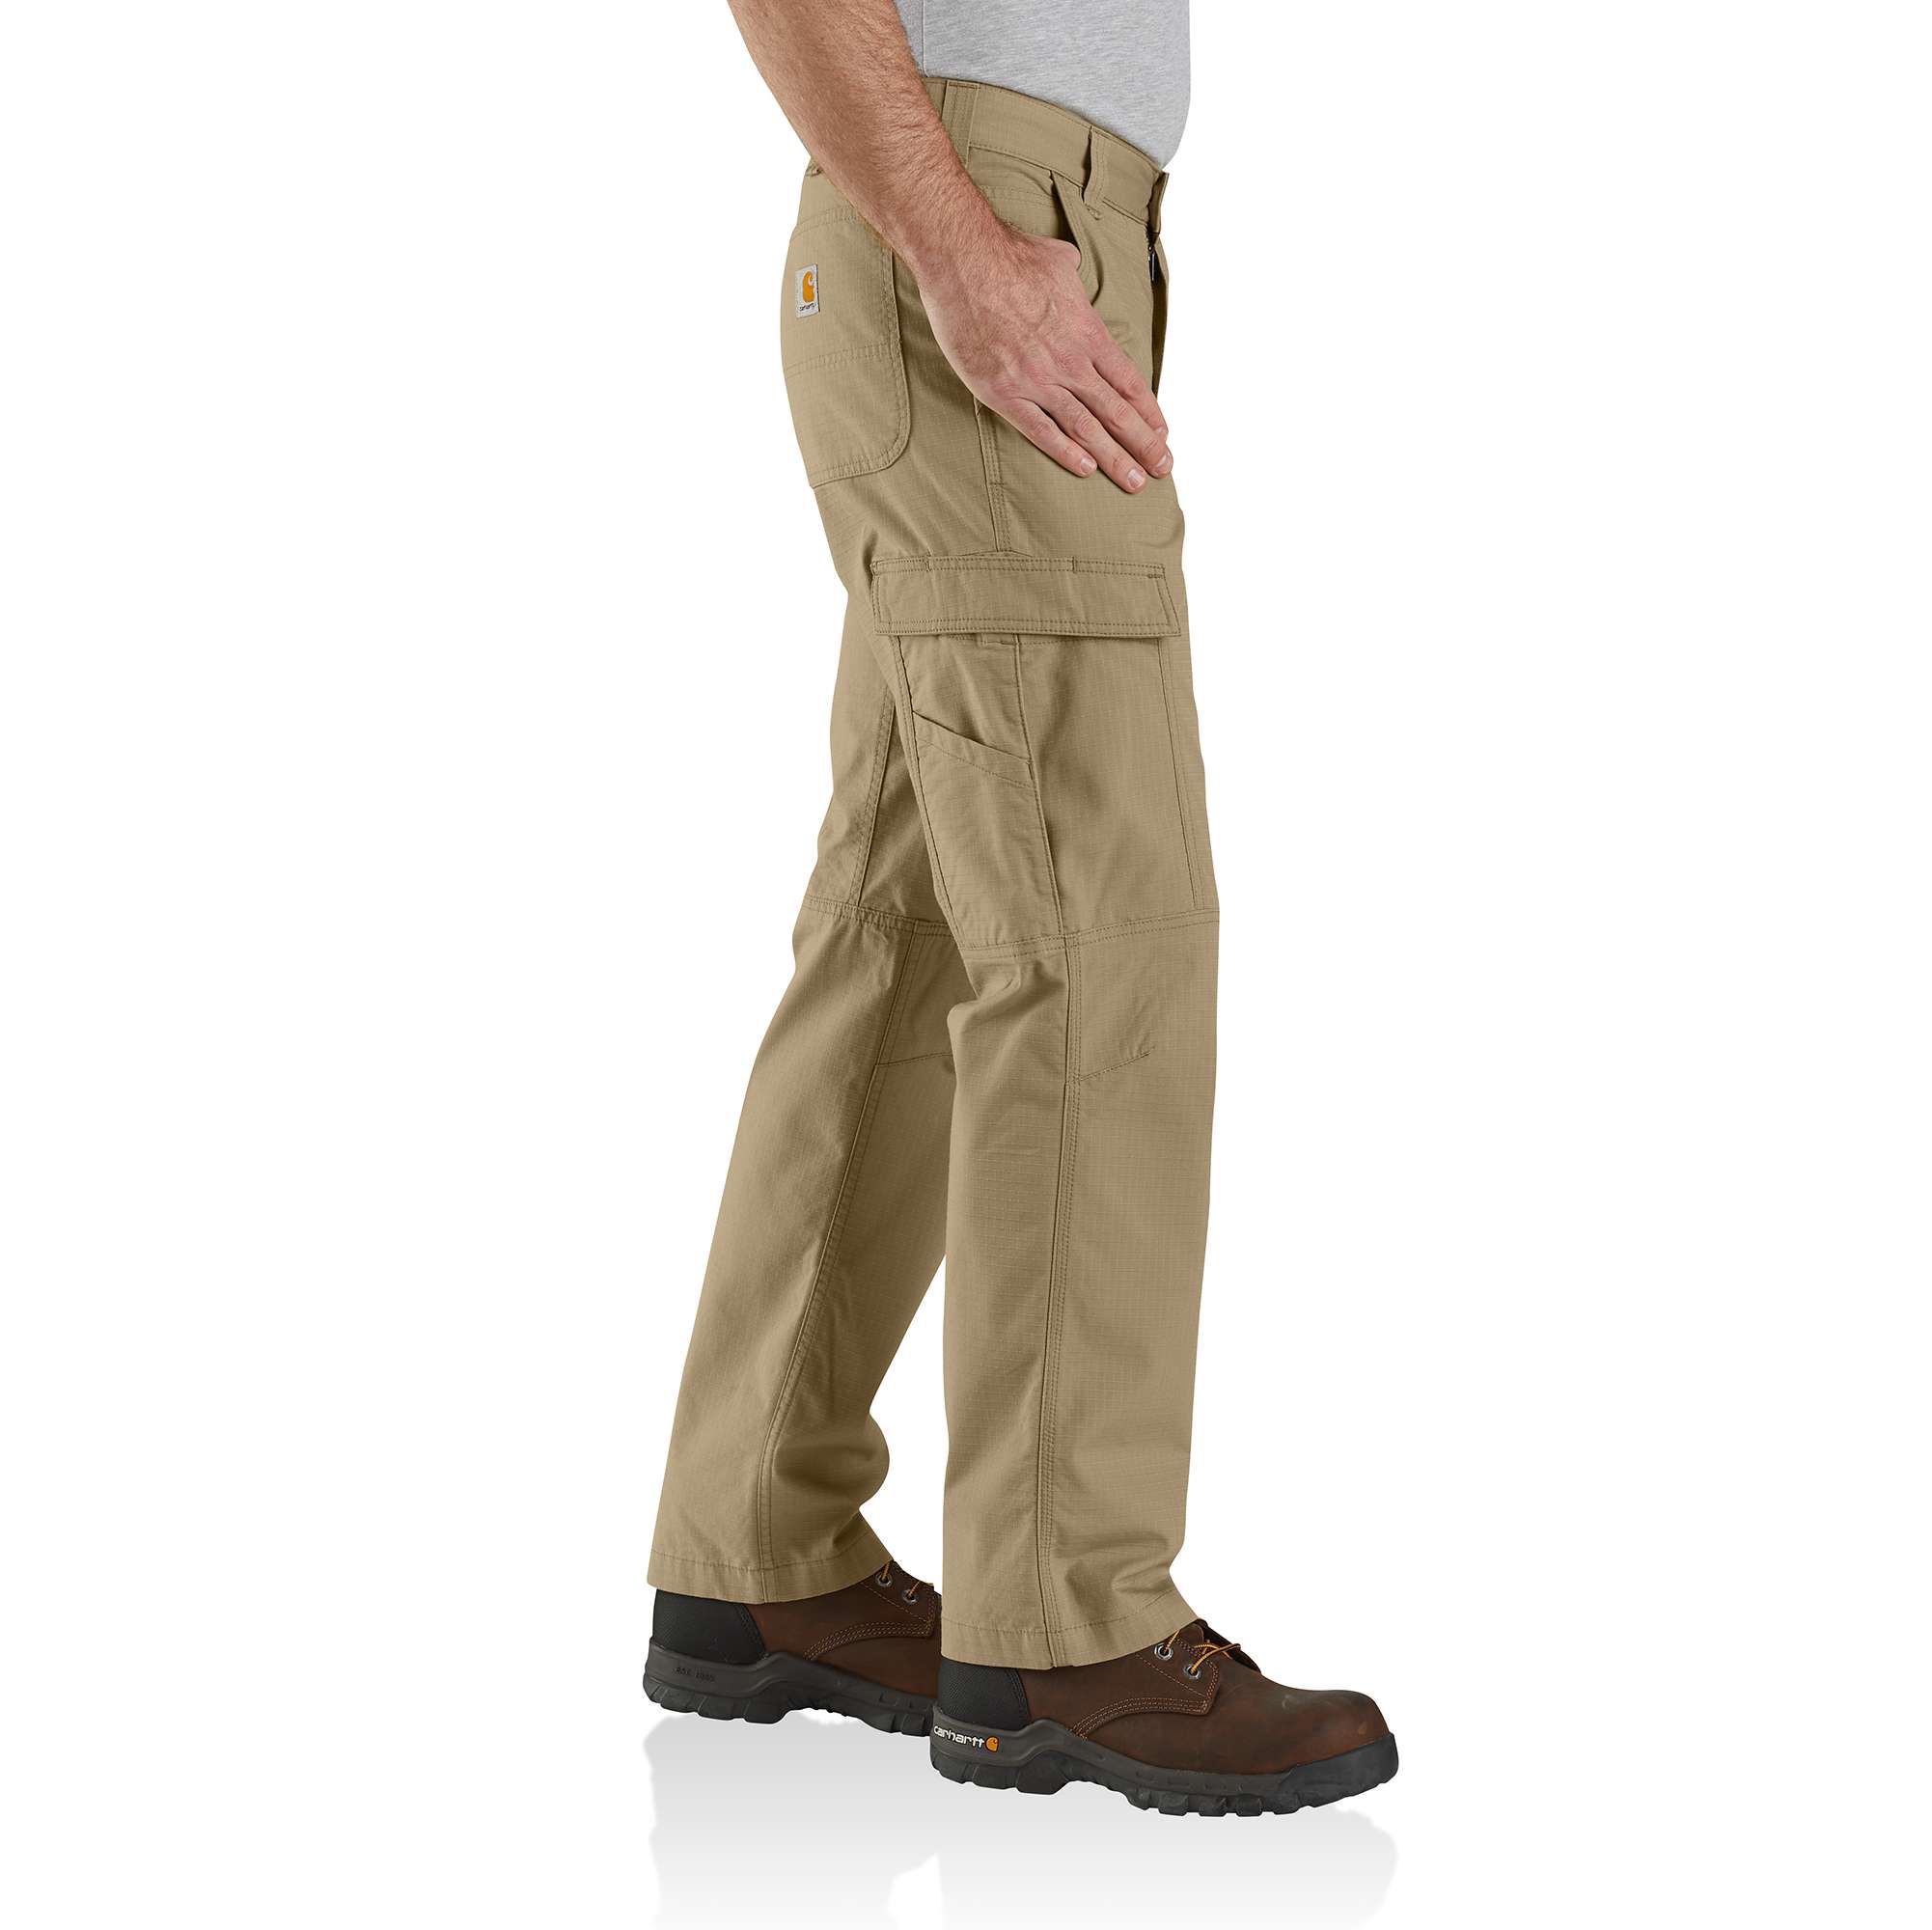 Men's Flex Ripstop Tactical Work Pants Water-Proof Stretch Cargo Pants  Relaxed Fit Lightweight Hiking Casual Slacks